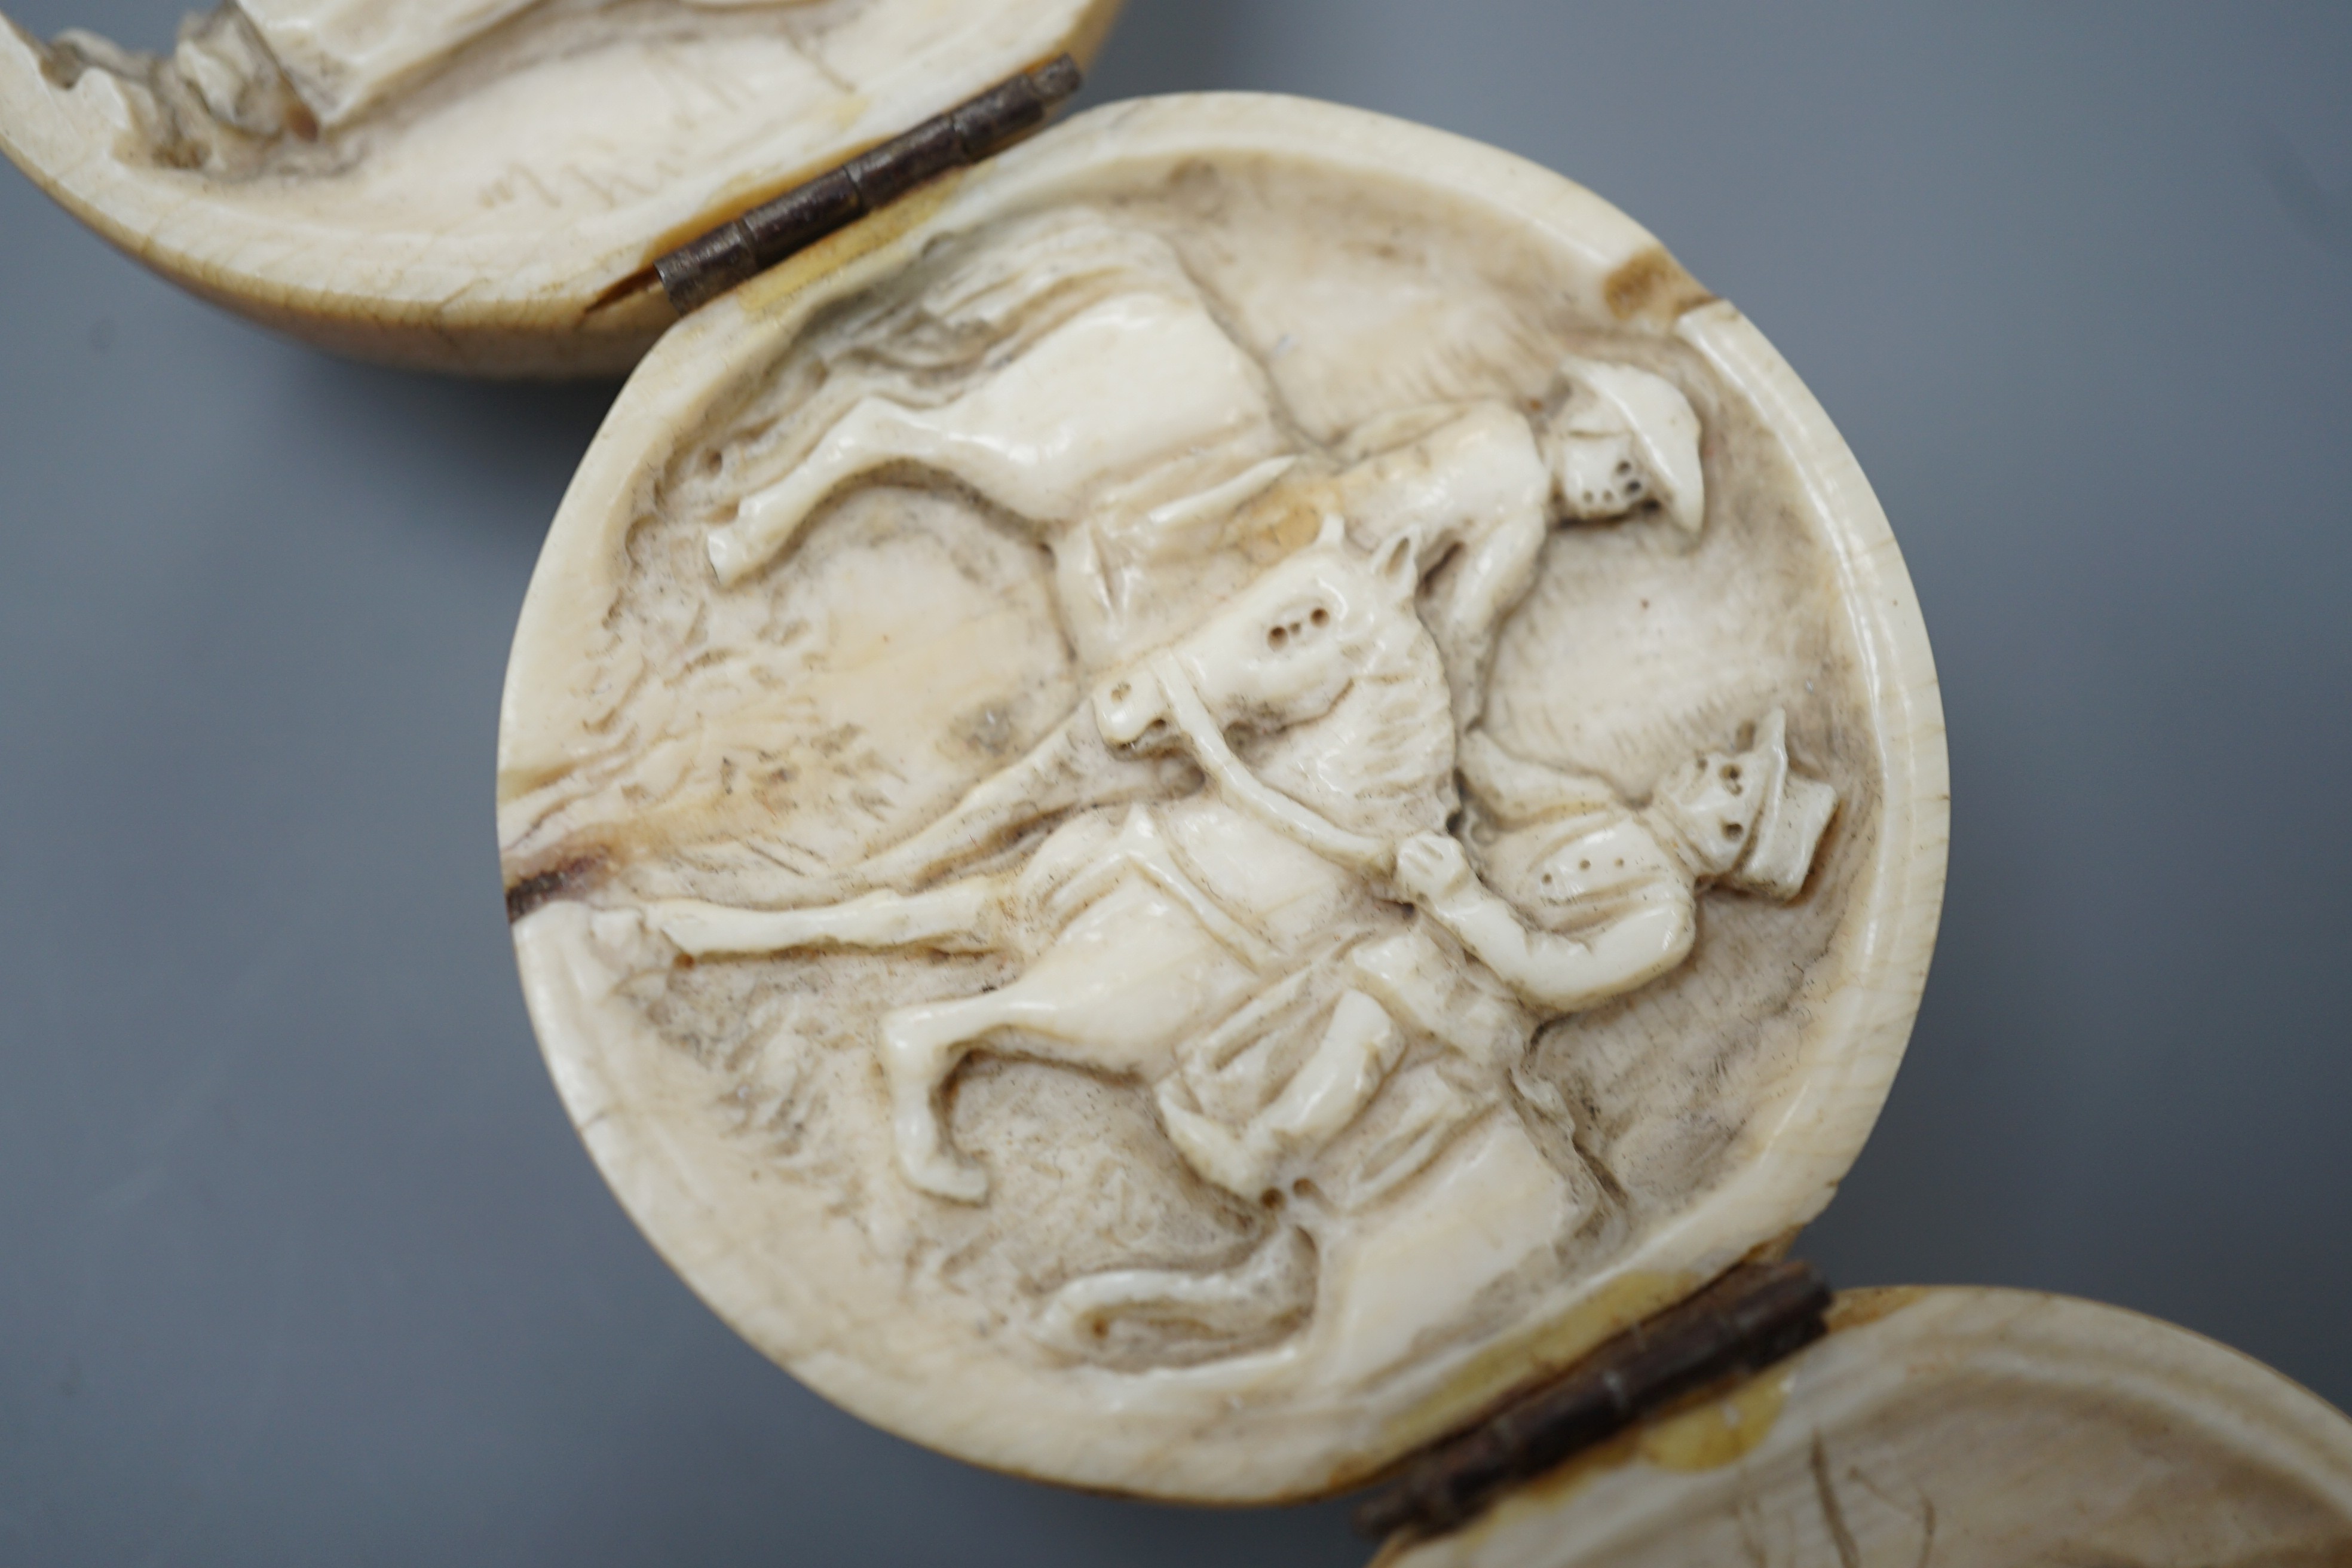 A 19th century Dieppe ivory globular triptych, possibly depicting Crimean war figures, 5.4cm diameter closed